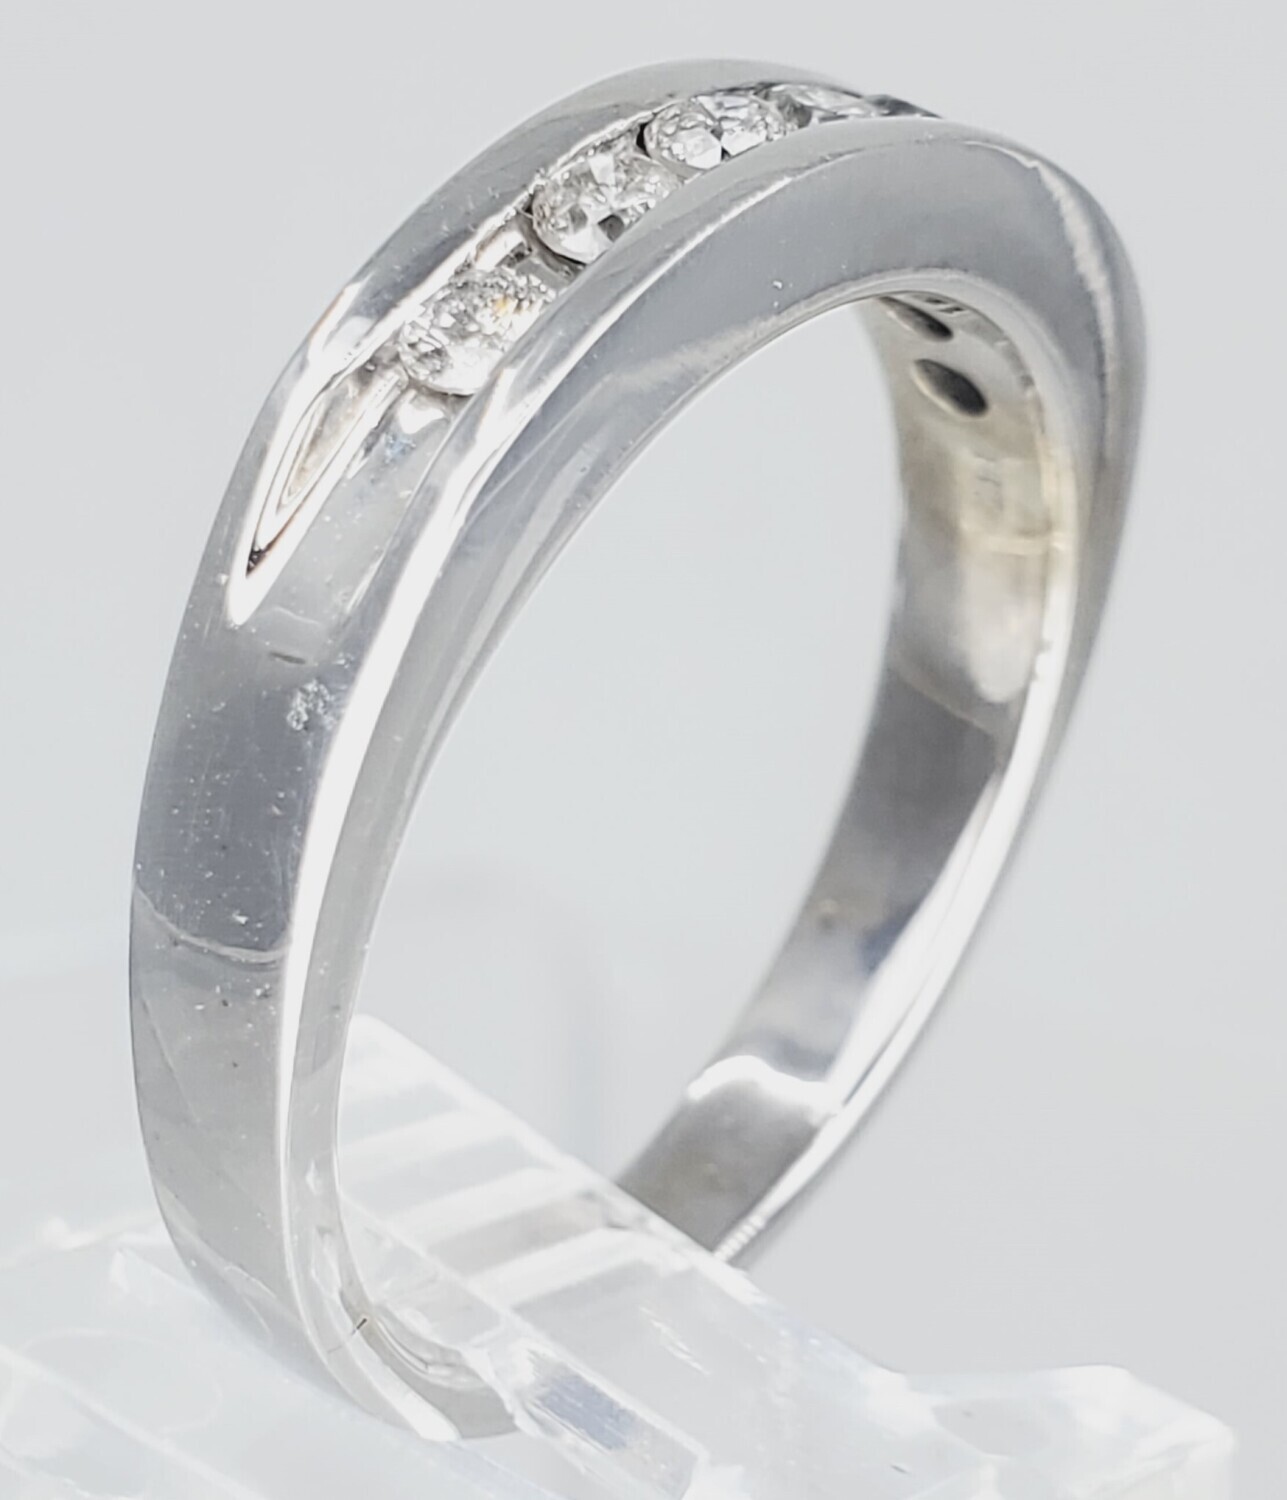 SOLD! CHANNEL SET 7 DIAMOND WEEDING RING SIZE 10